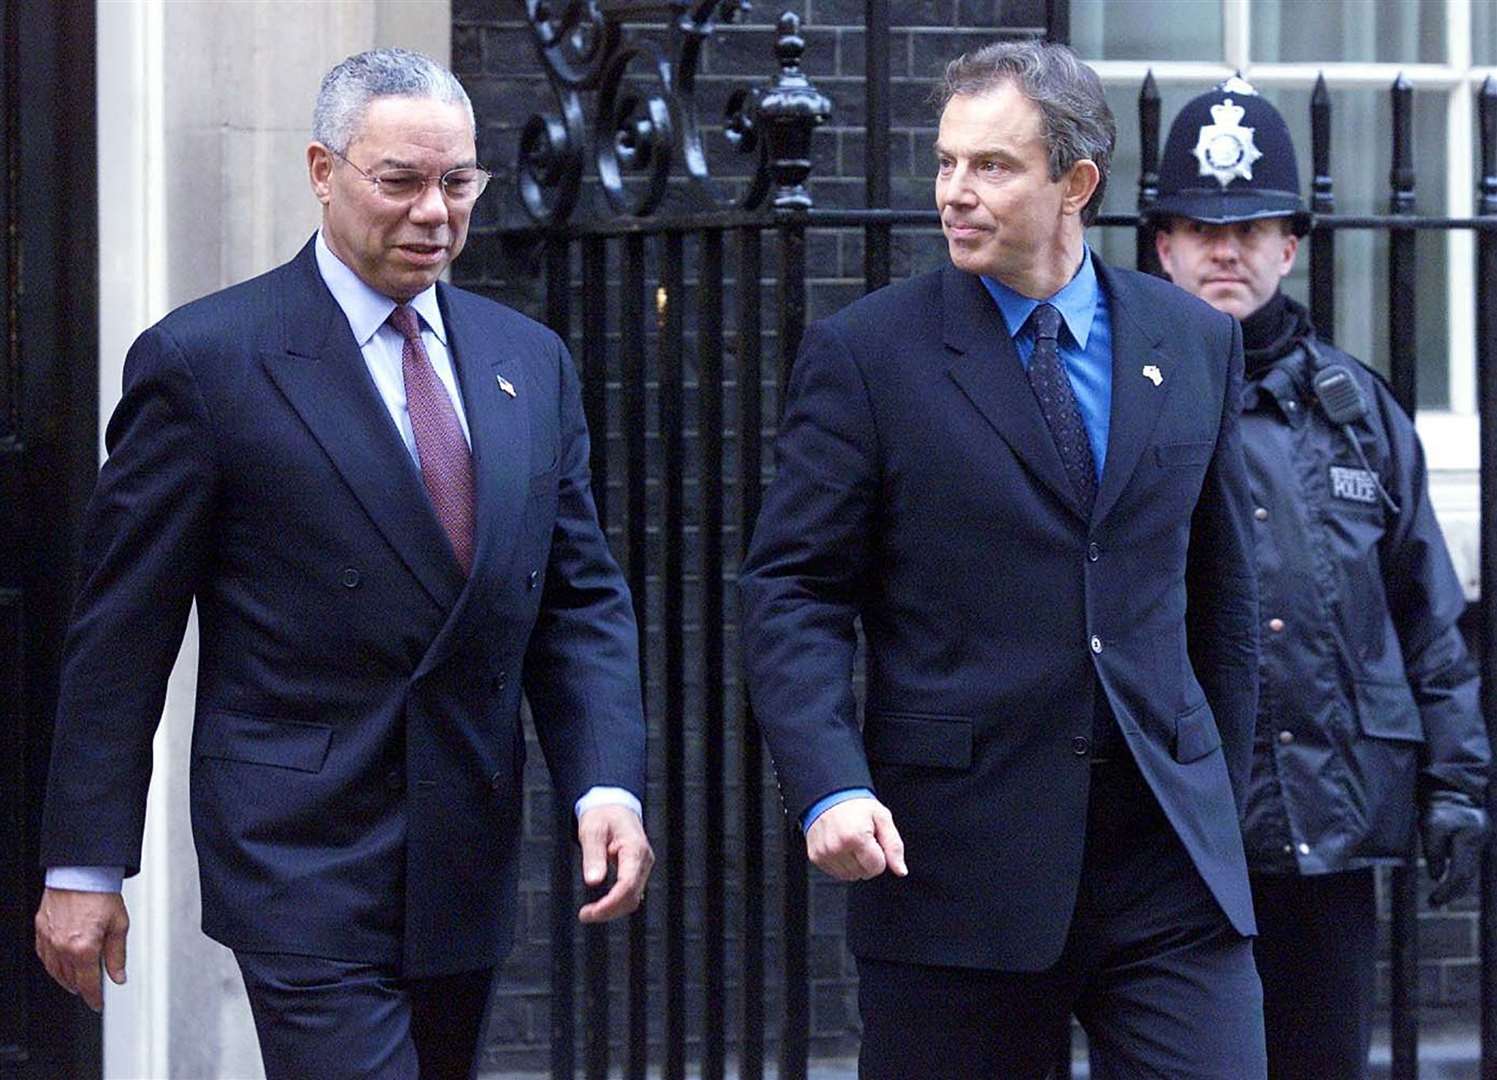 Tony Blair said Colin Powell had been a ‘towering figure’ in US military and political life (Sean Dempsey/PA)